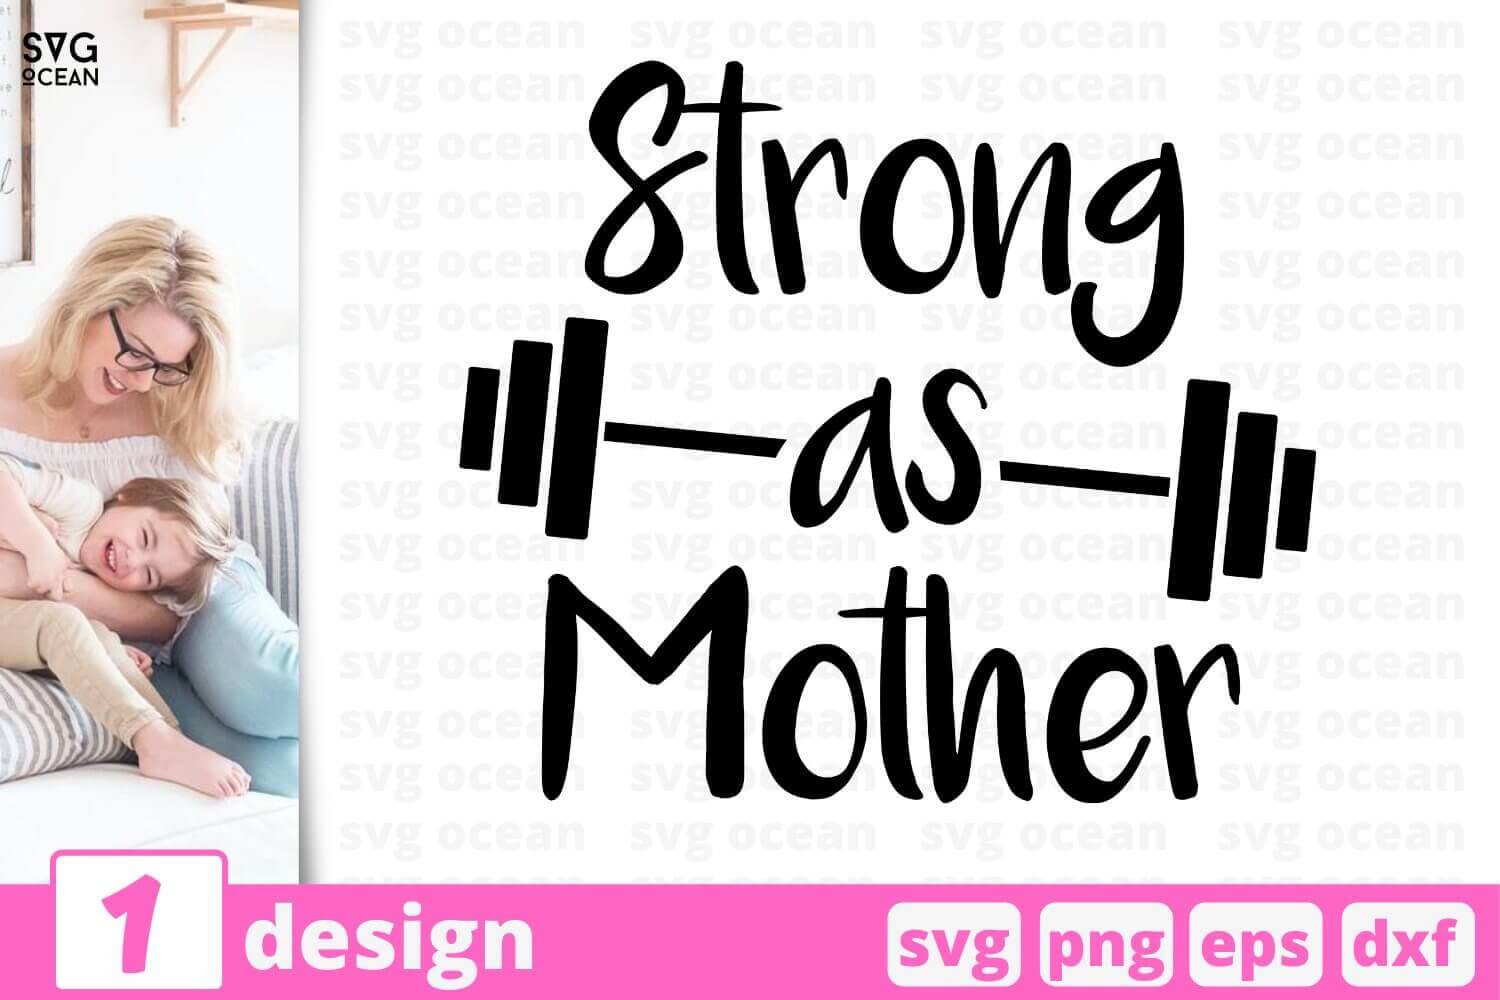 Strong as a Mother Svg, Mothers Day, Tough Momma Svg -  Israel